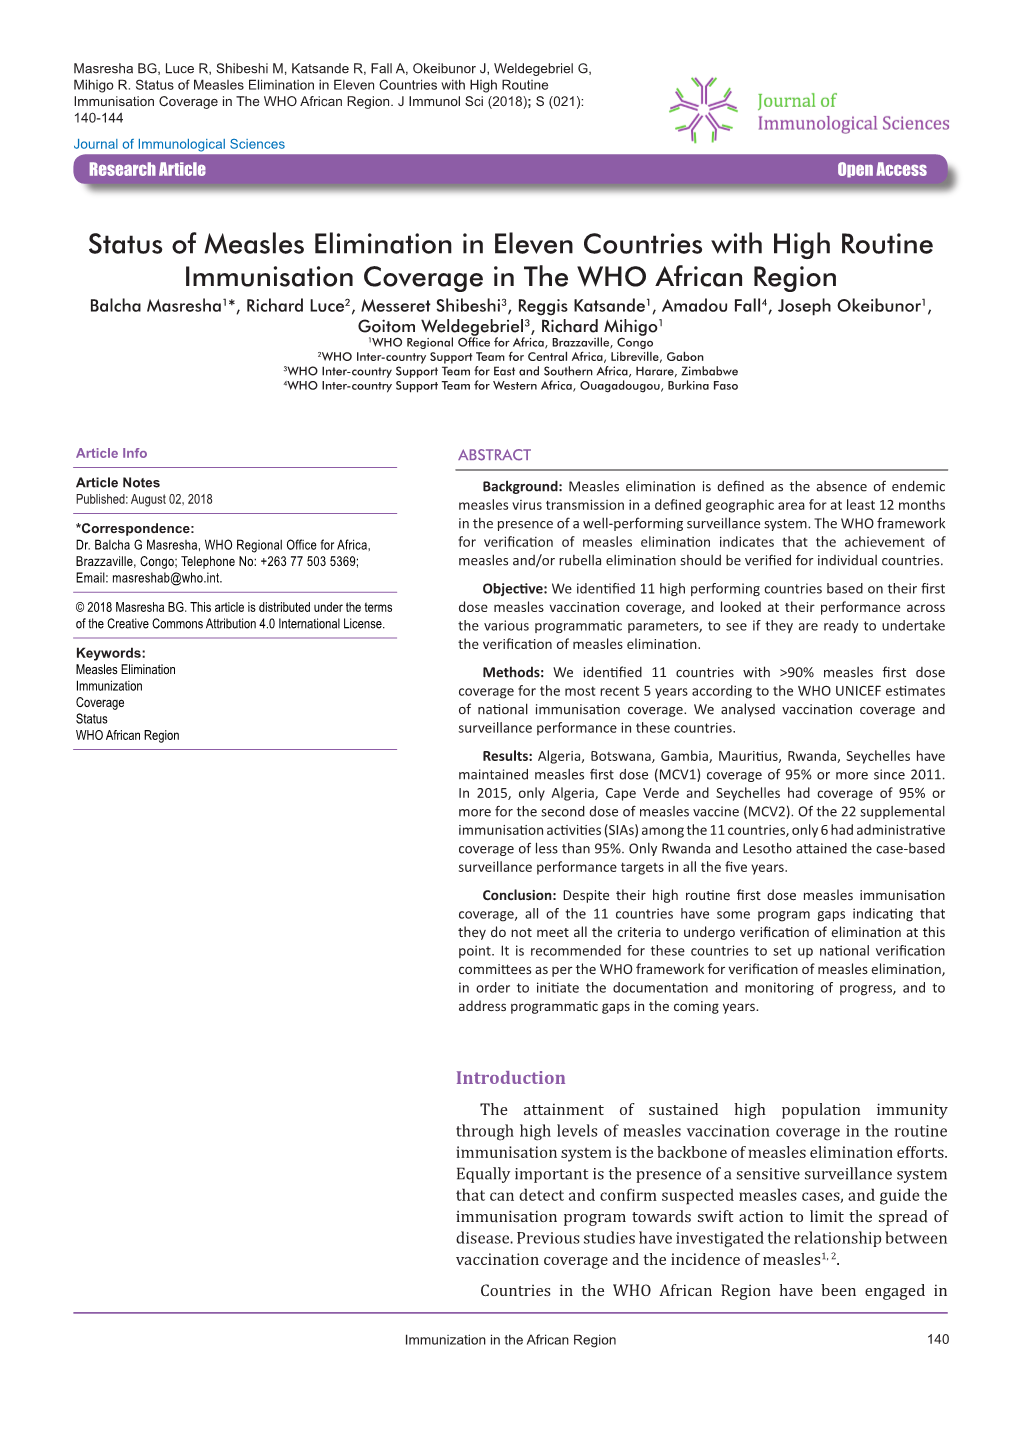 Status of Measles Elimination in Eleven Countries with High Routine Immunisation Coverage in the WHO African Region